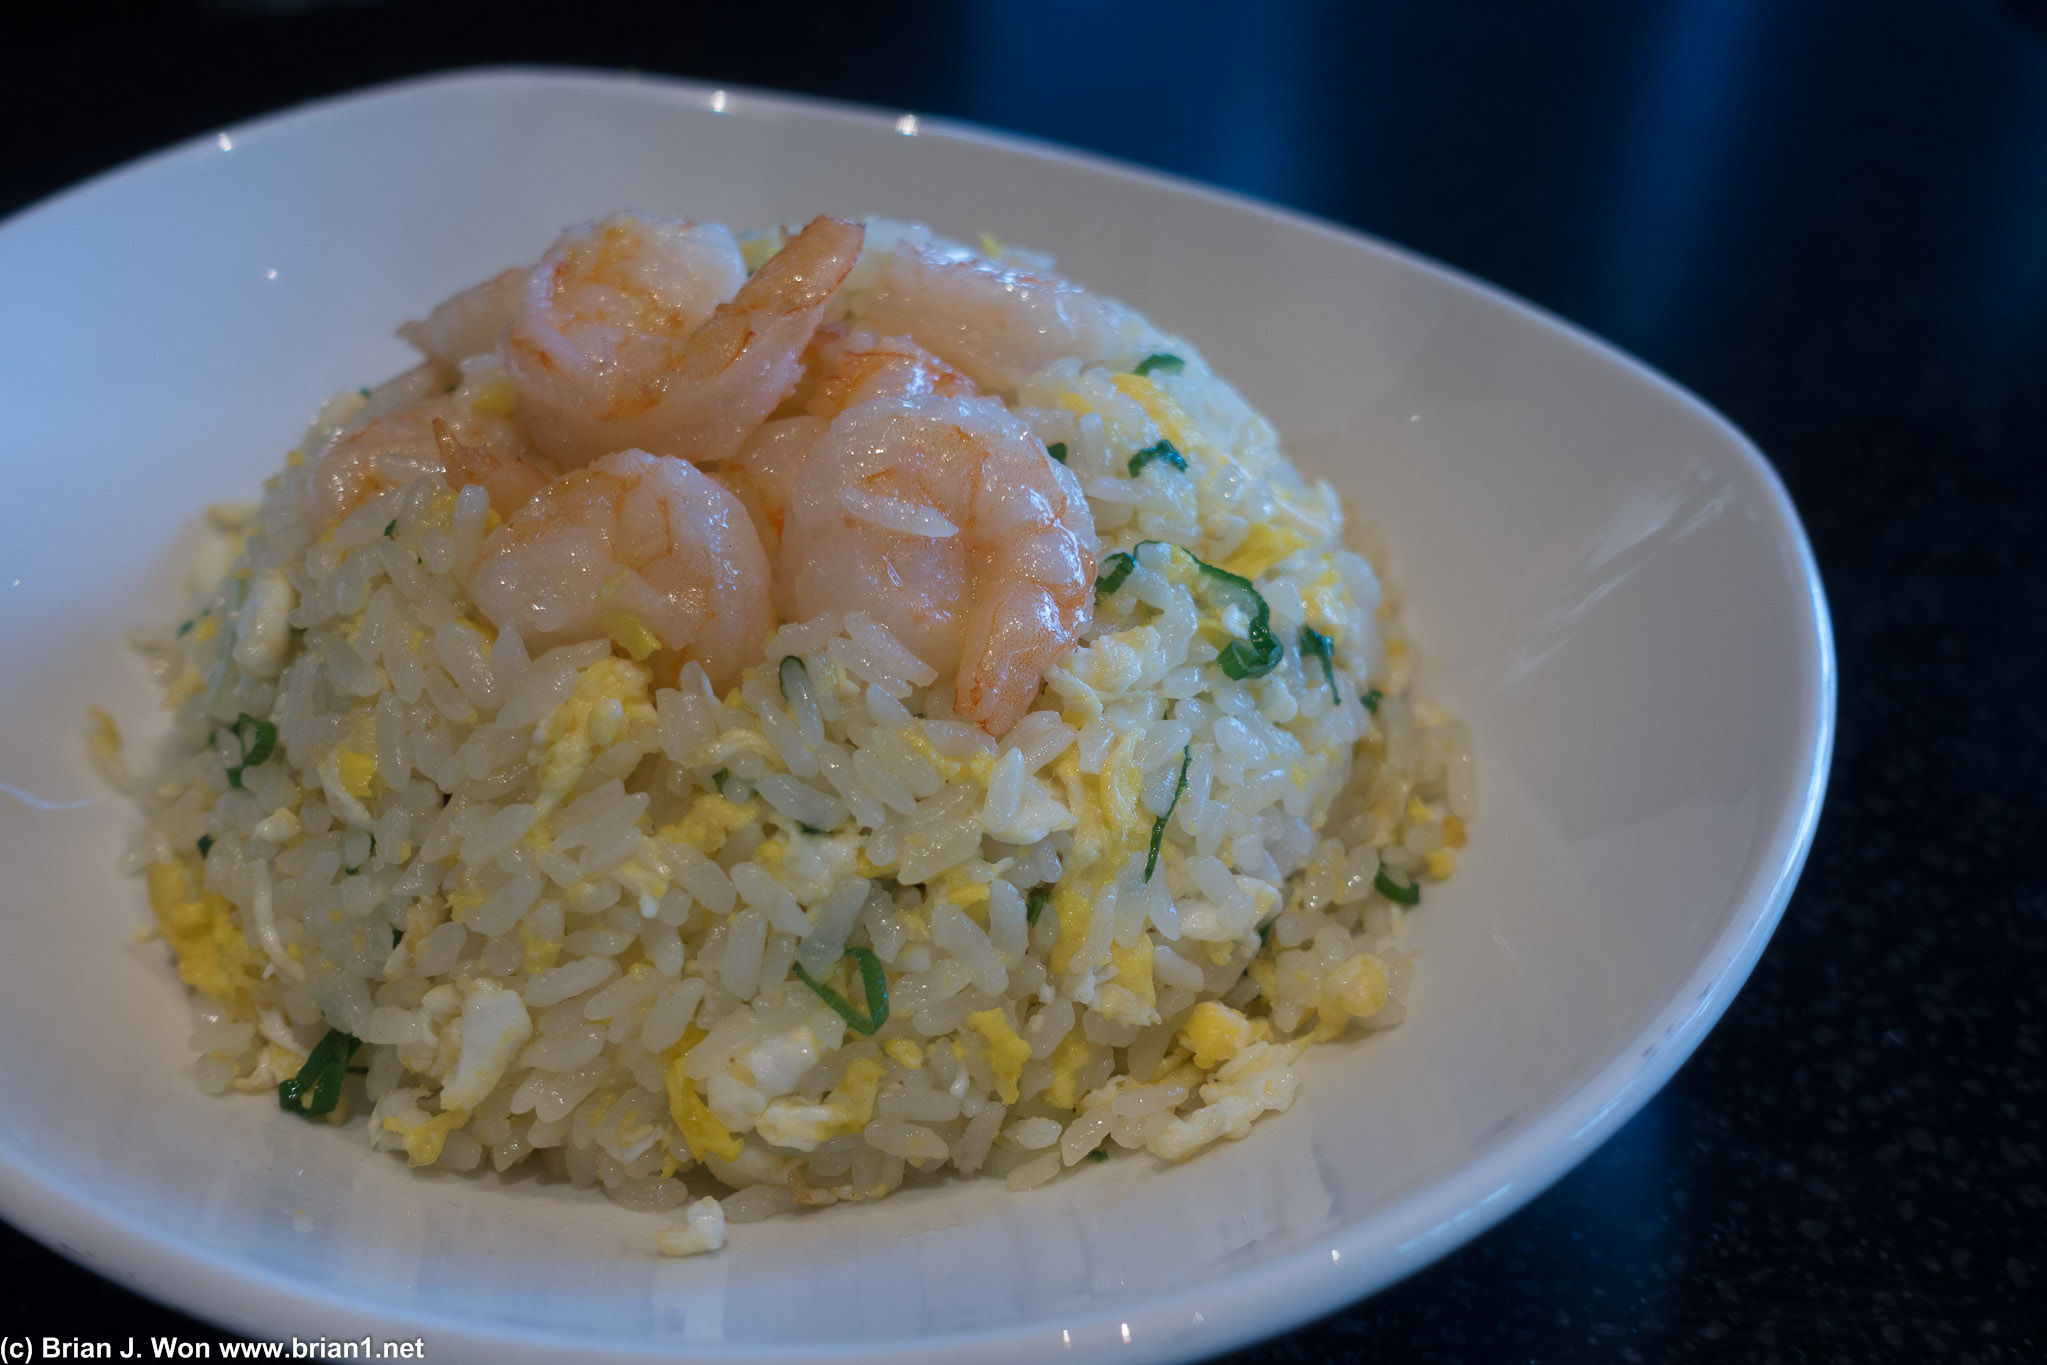 Shrimp fried rice. Very good. Way too much food.